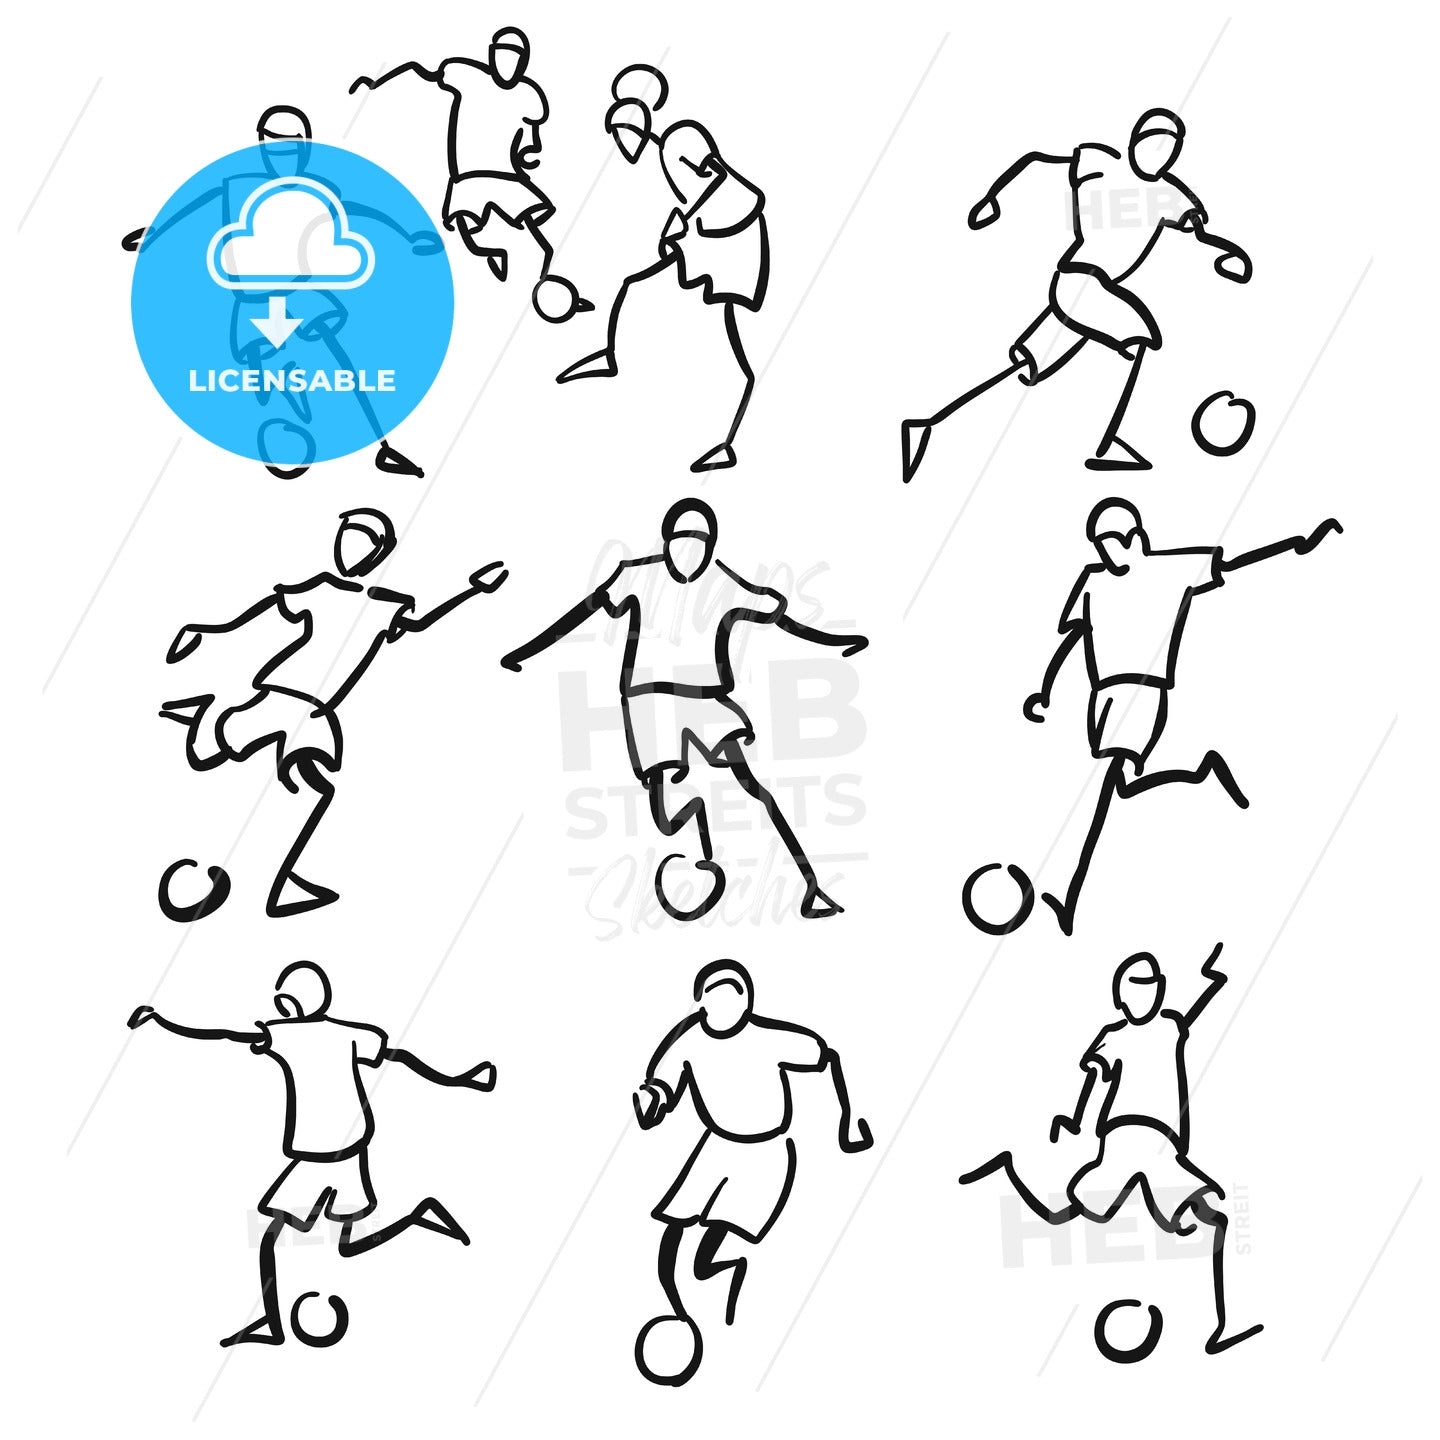 Football or Soccer Player Motion Sketch Studies – instant download